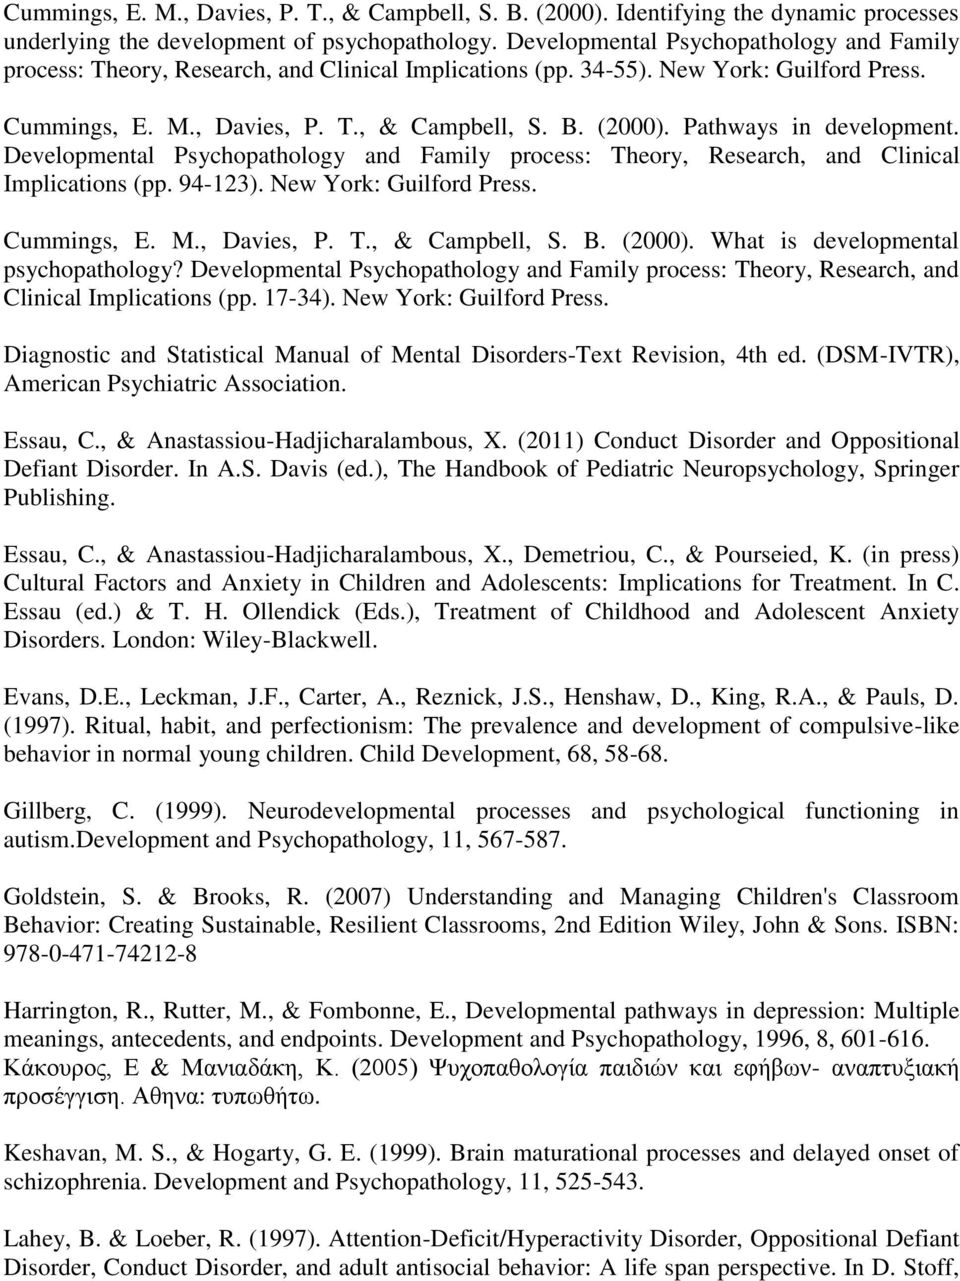 Pathways in development. Developmental Psychopathology and Family process: Theory, Research, and Clinical Implications (pp. 94-123). New York: Guilford Press. Cummings, E. M., Davies, P. T., & Campbell, S.